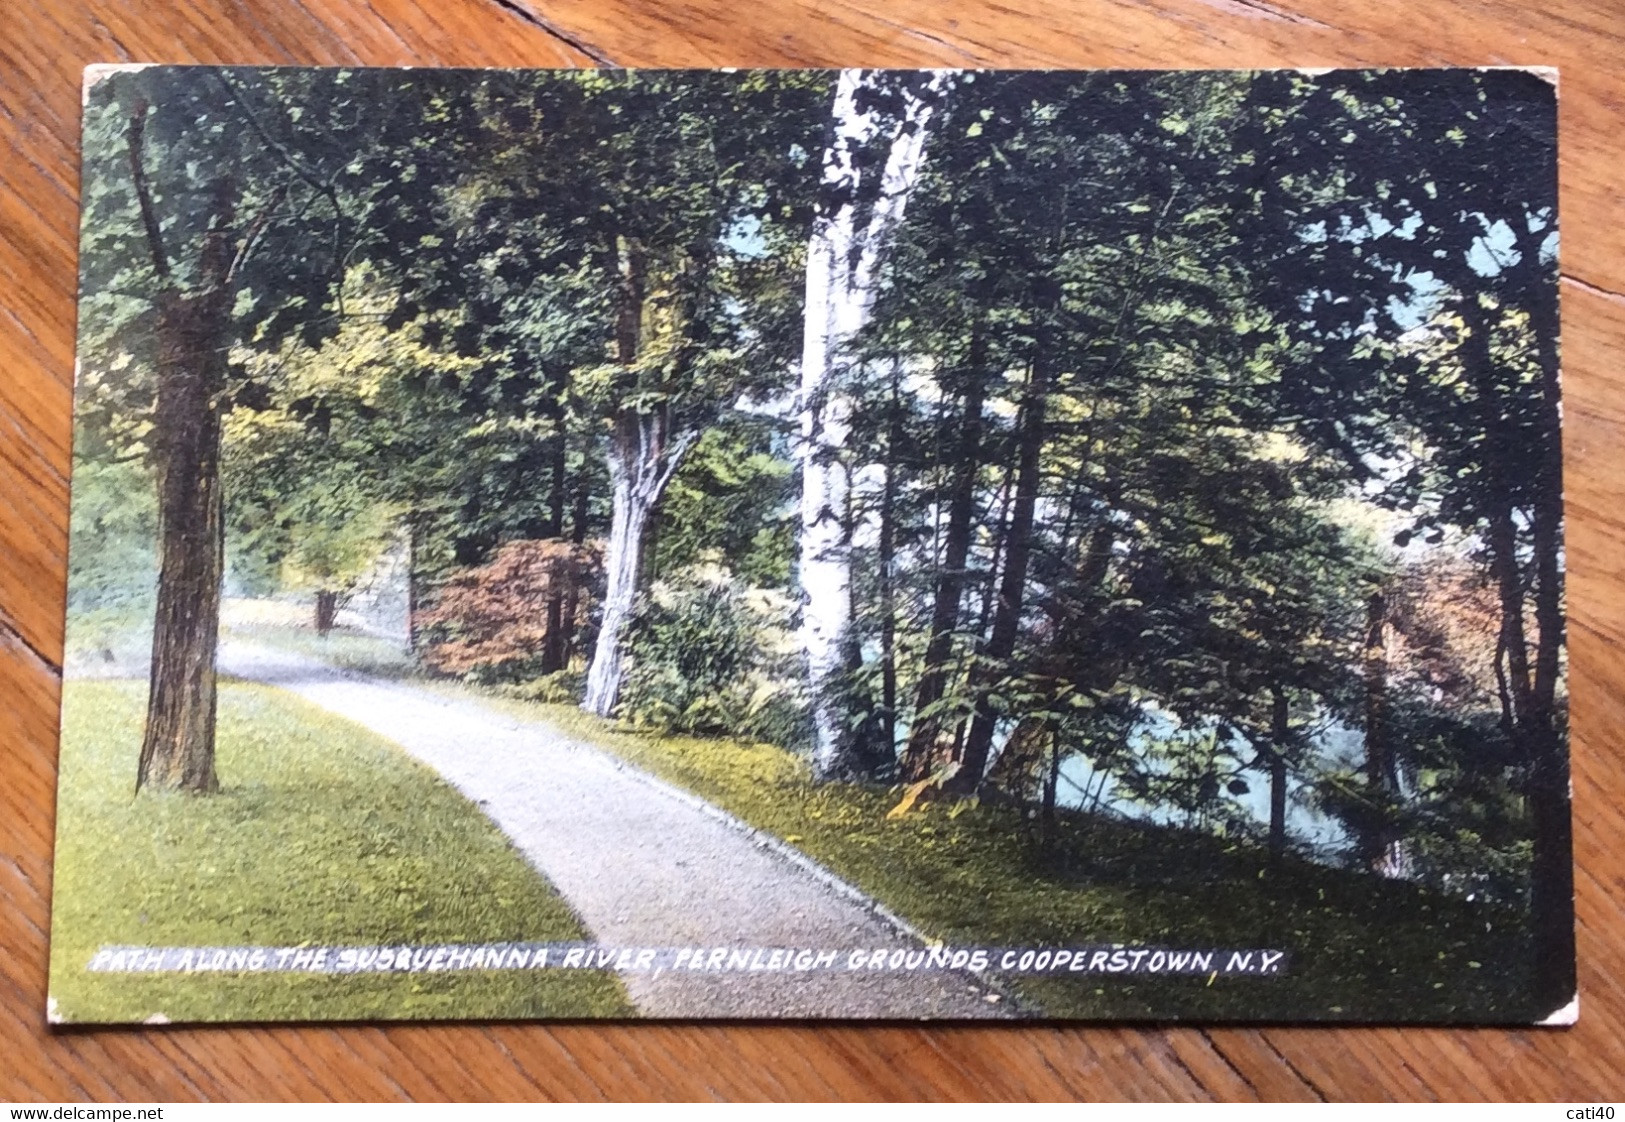 USA - COOPERSTOWN  VIALE NEL BOSCO   - VINTAGE POST CARD   1911 - Fall River